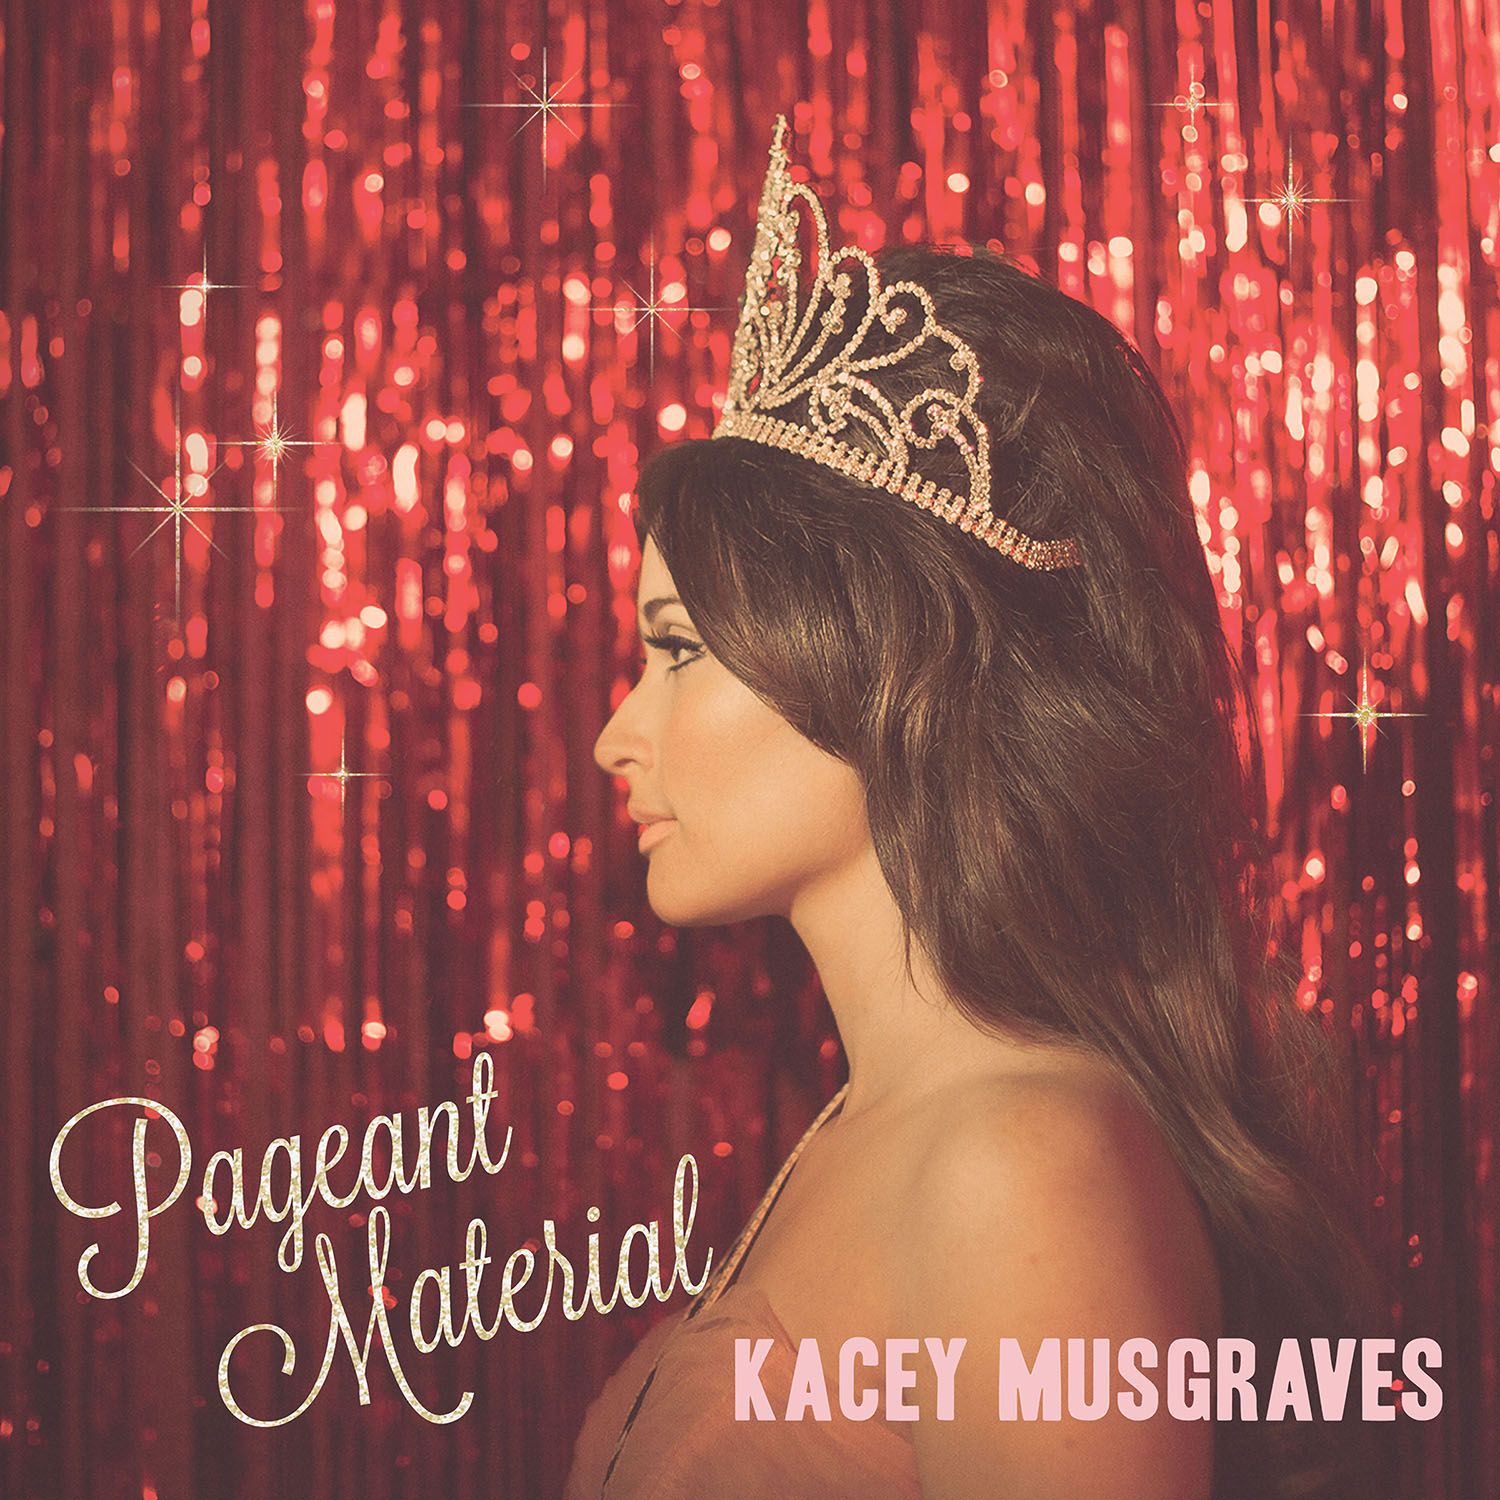 KACEY MUSGRAVES TO RELEASE PAGEANT MATERIAL